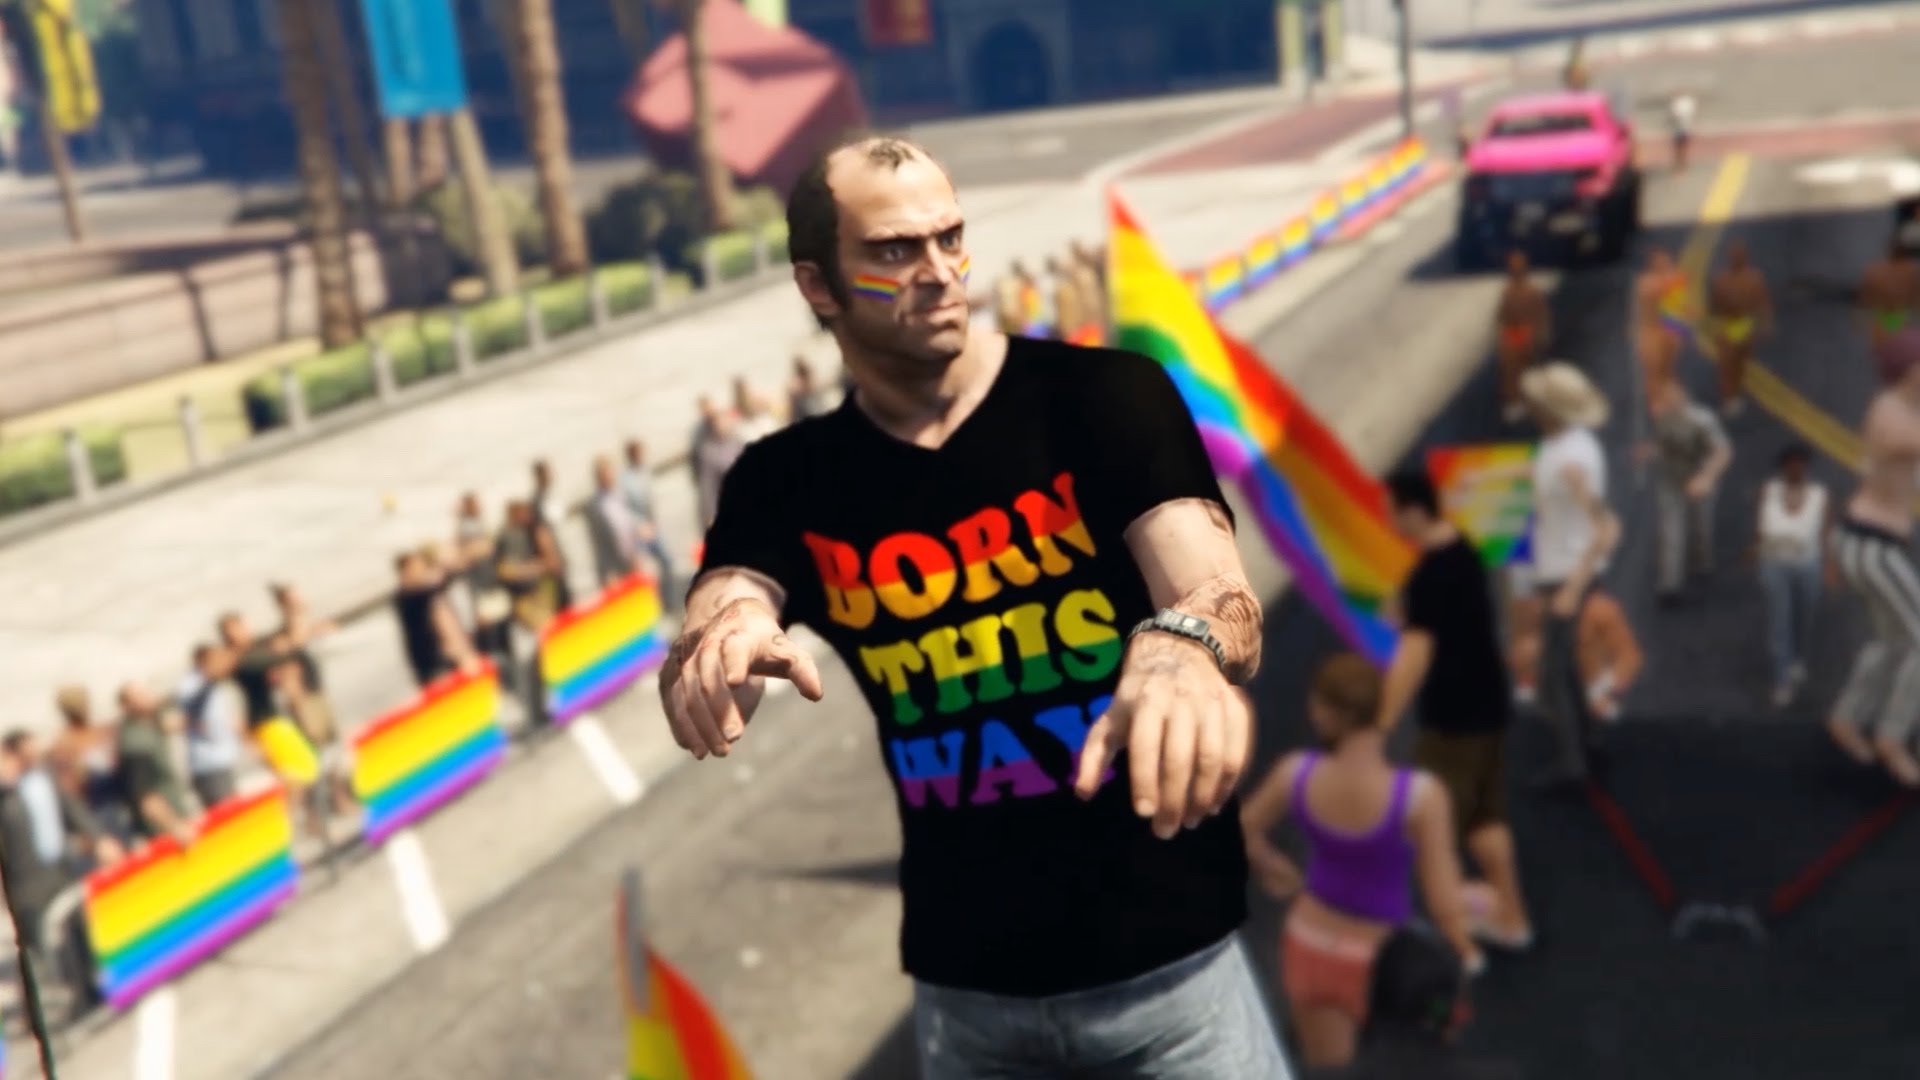 Grand Theft Auto pride parade will be indestructible